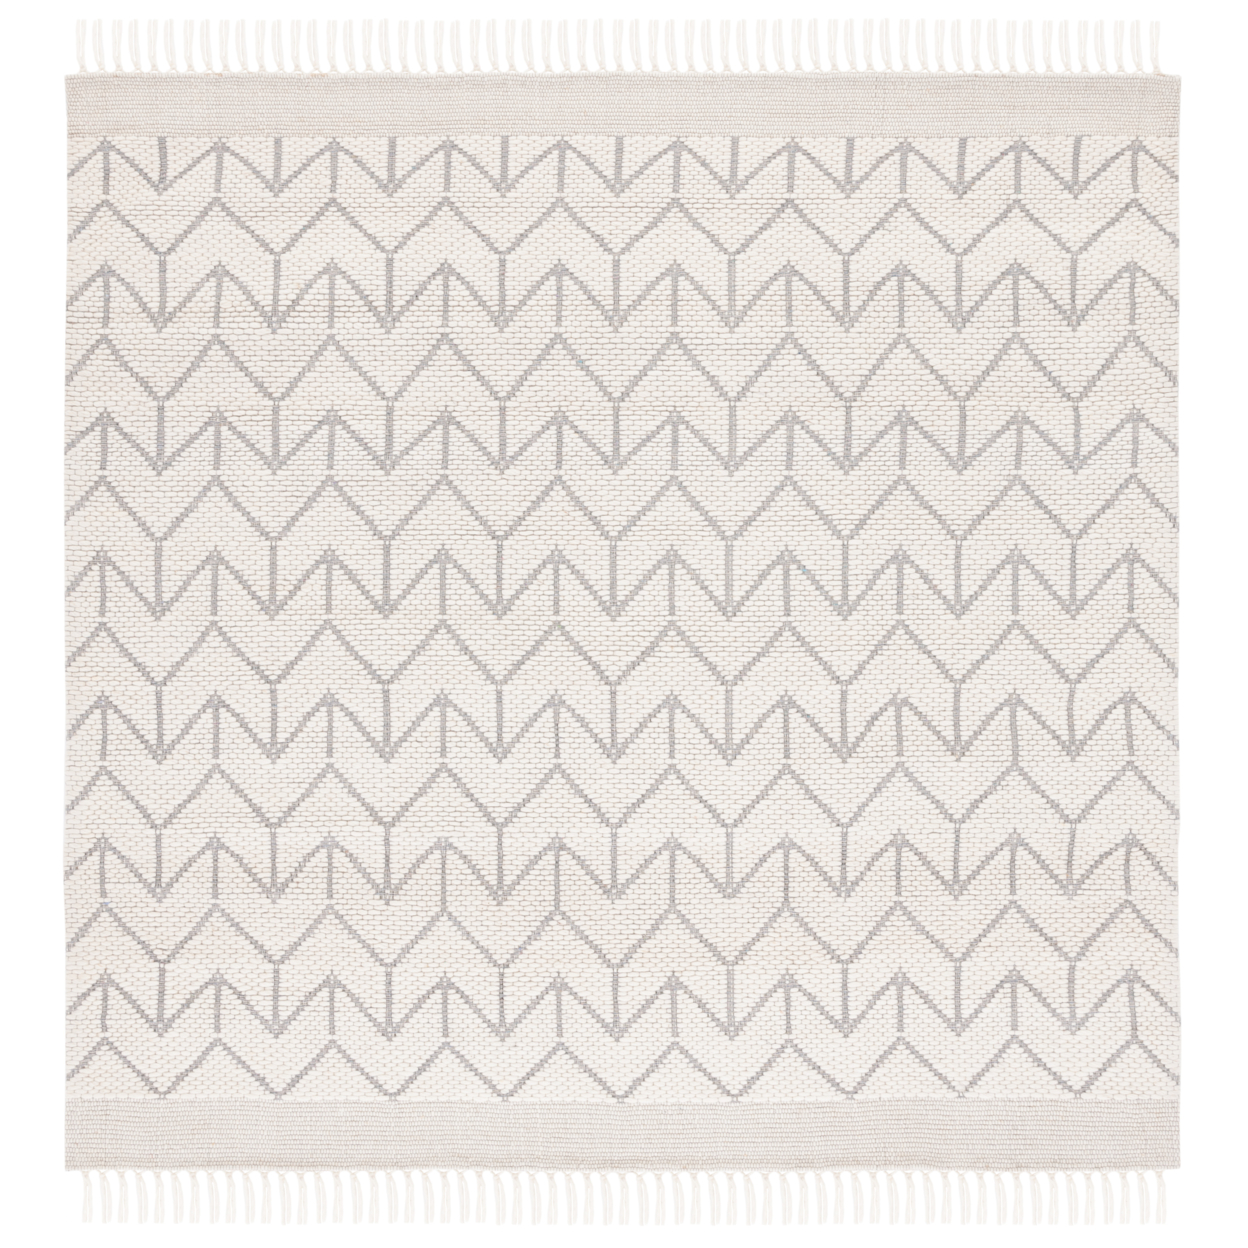 SAFAVIEH Vermont Collection VRM310A Handmade Ivory Rug - 6' Square